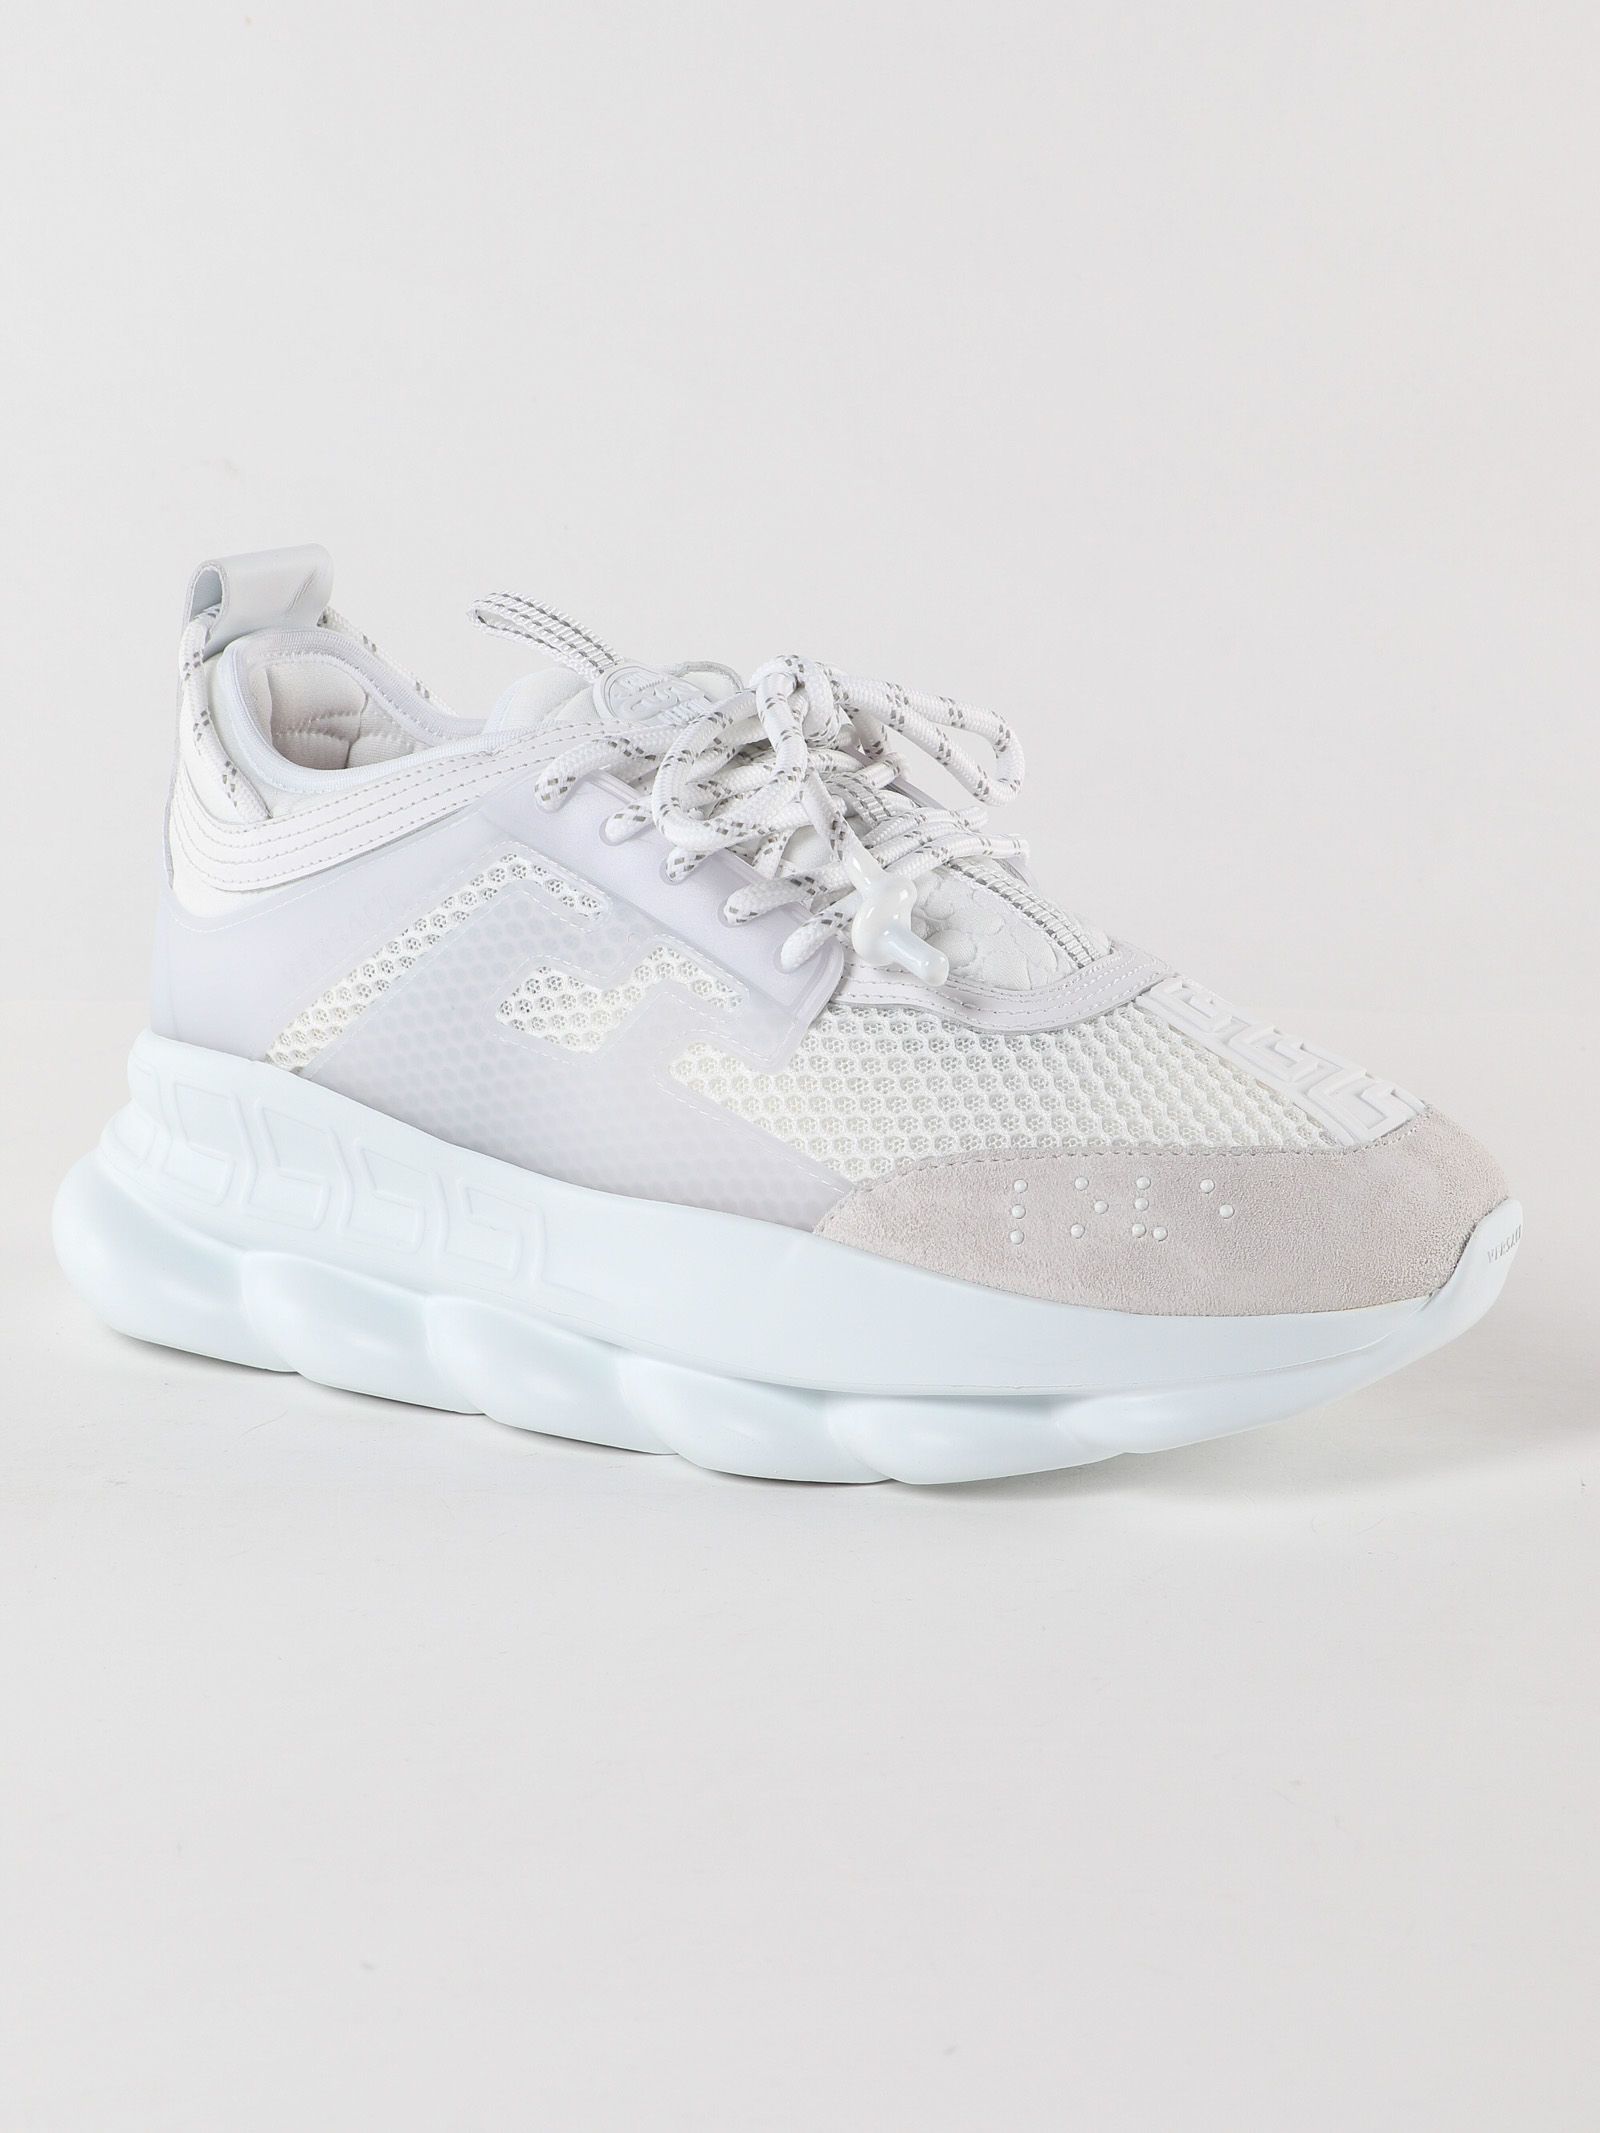 Versace Versace Chain Reaction Sneakers - White - 10794257 | italist